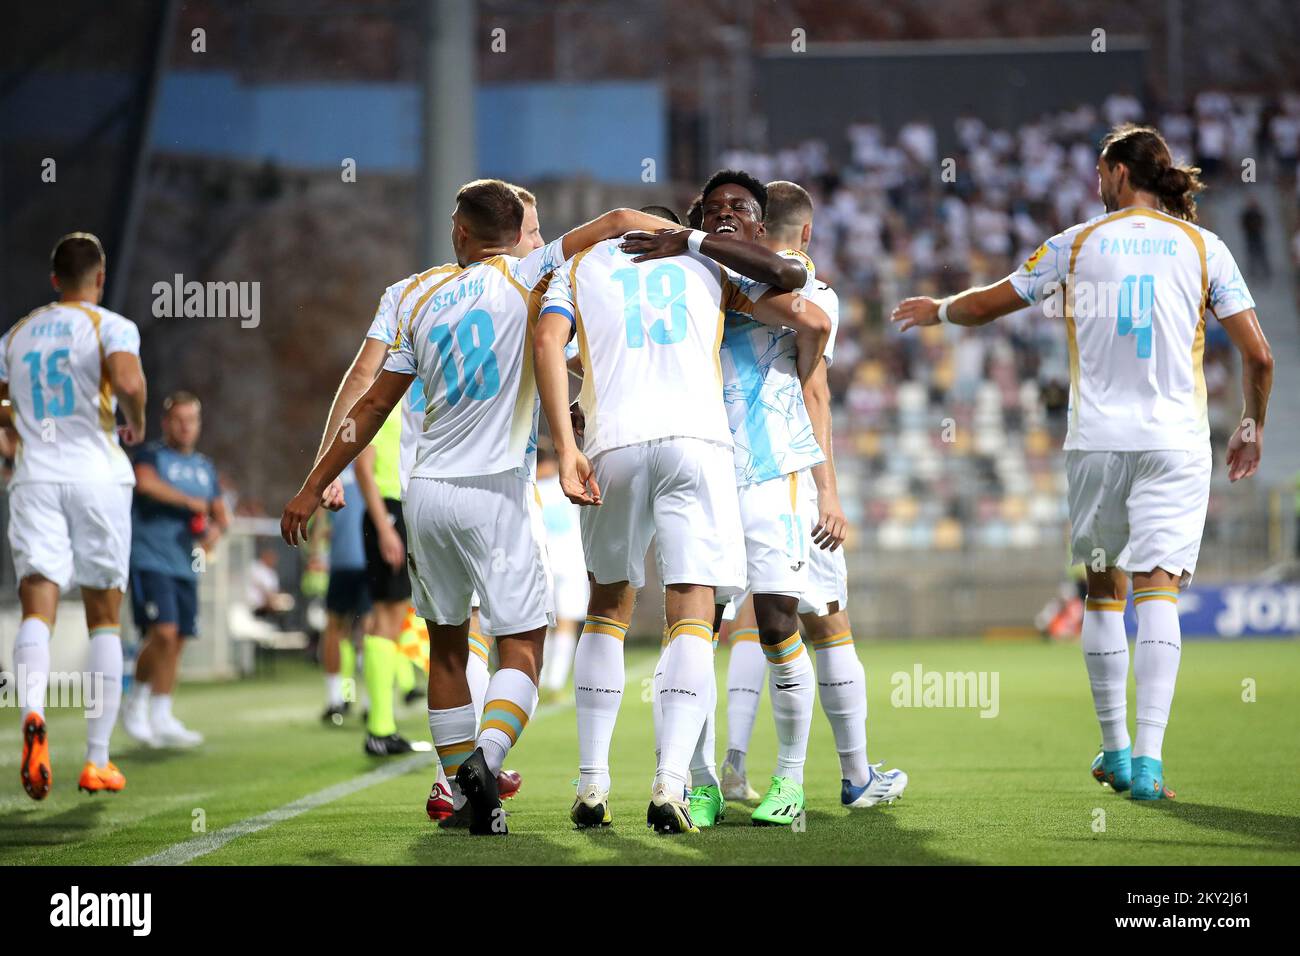 Players of HNK Rijeka celebrate after scoring a goal during the